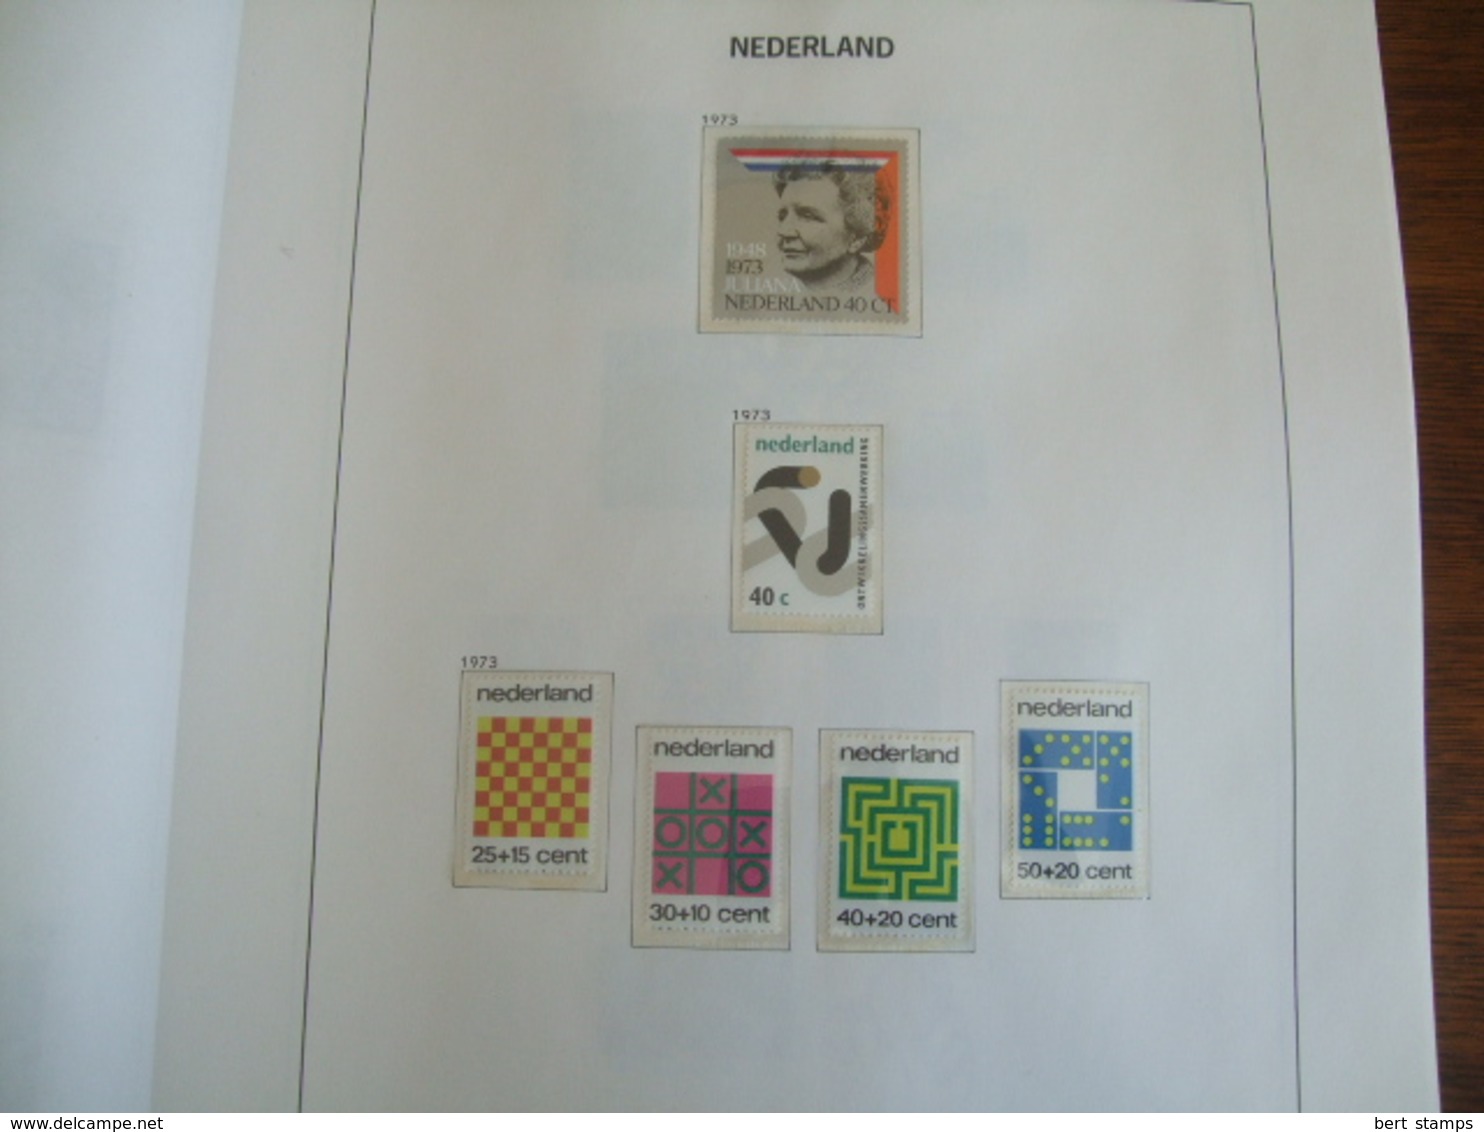 Mooie collectie Nederland, nice Collection Netherlands, MNH and Hinged from 1944 - 1989